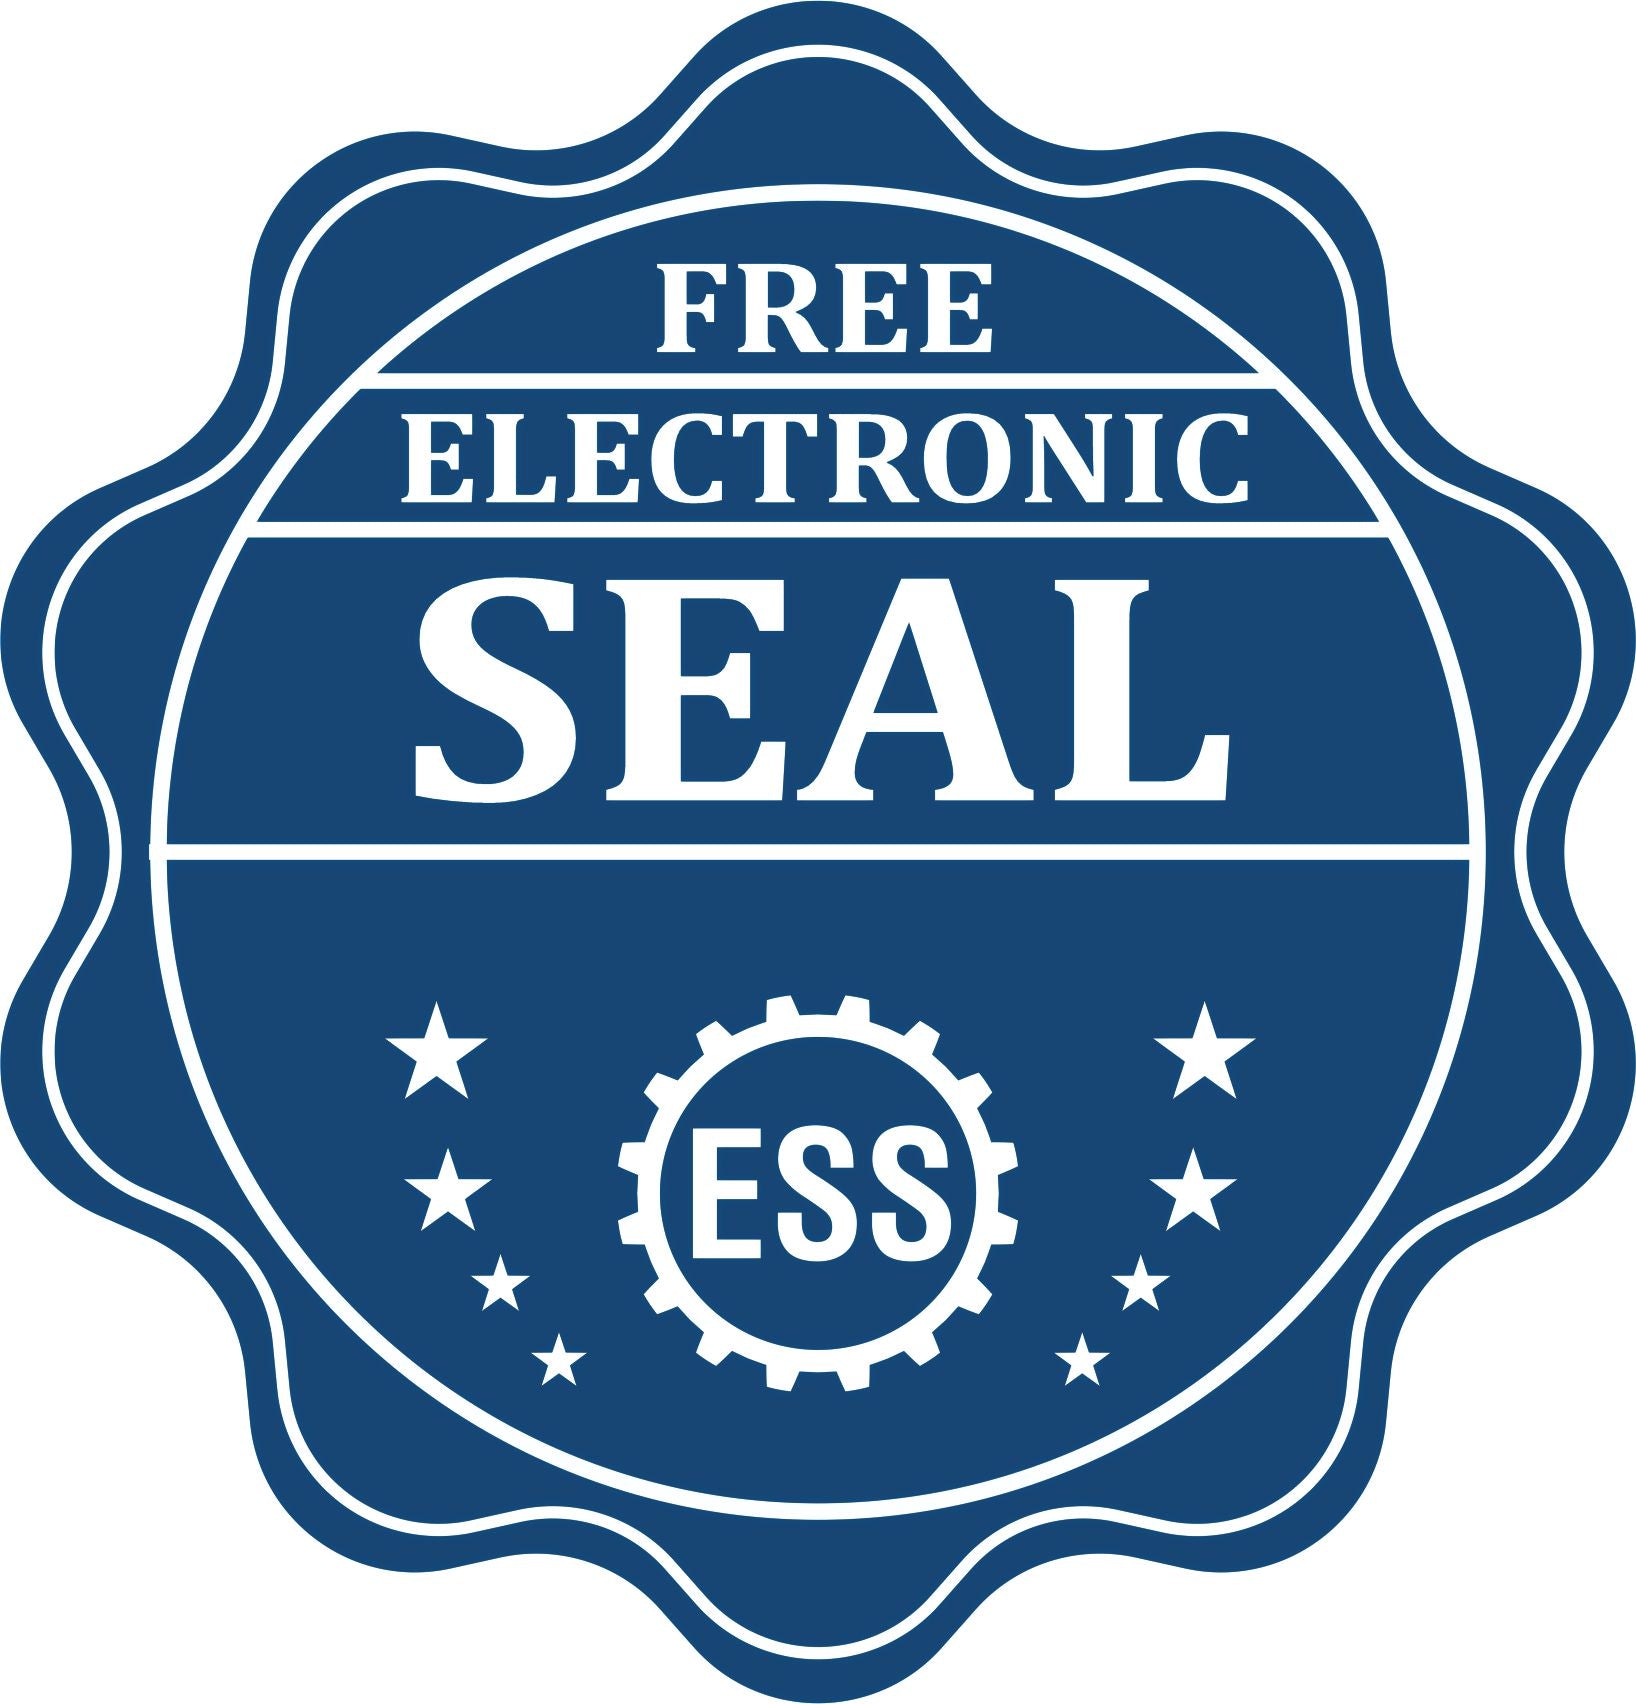 A badge showing a free electronic seal for the Slim Pre-Inked Iowa Land Surveyor Seal Stamp with stars and the ESS gear on the emblem.